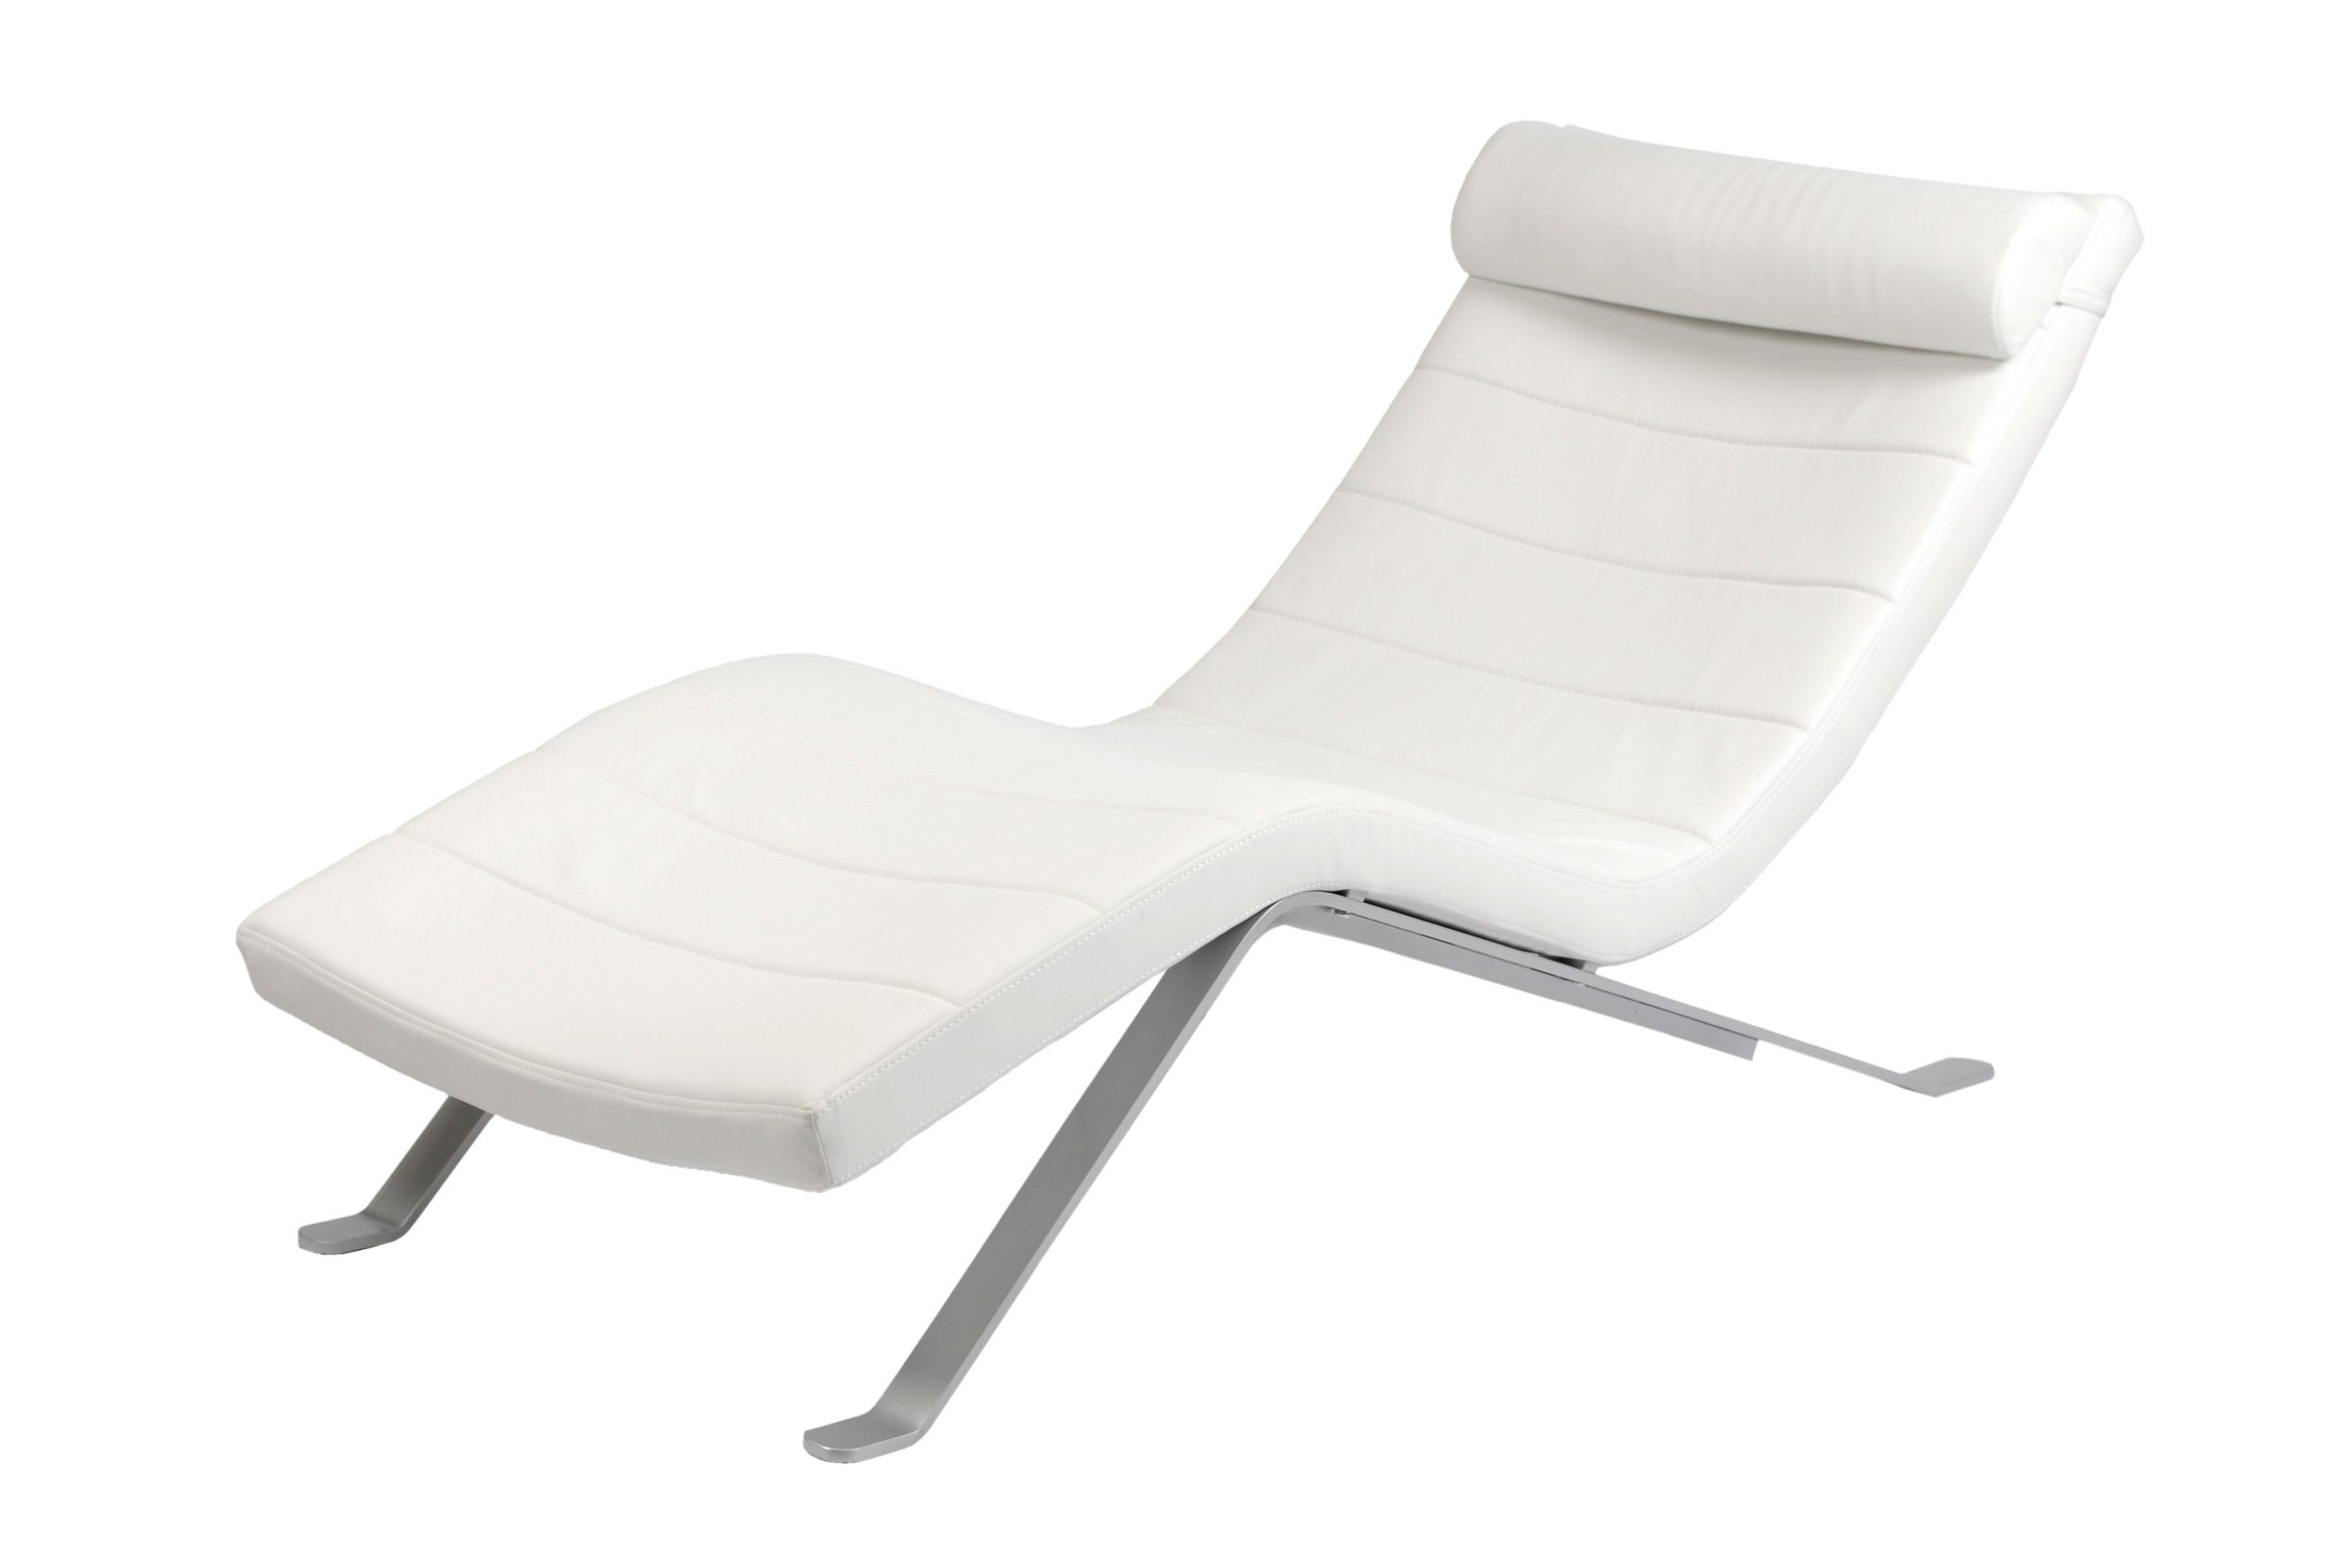 White Chaise Lounge Chairs Inside 2017 Convertible Chair : Outdoor Chaise Lounge Chairs Lounge White (View 10 of 15)